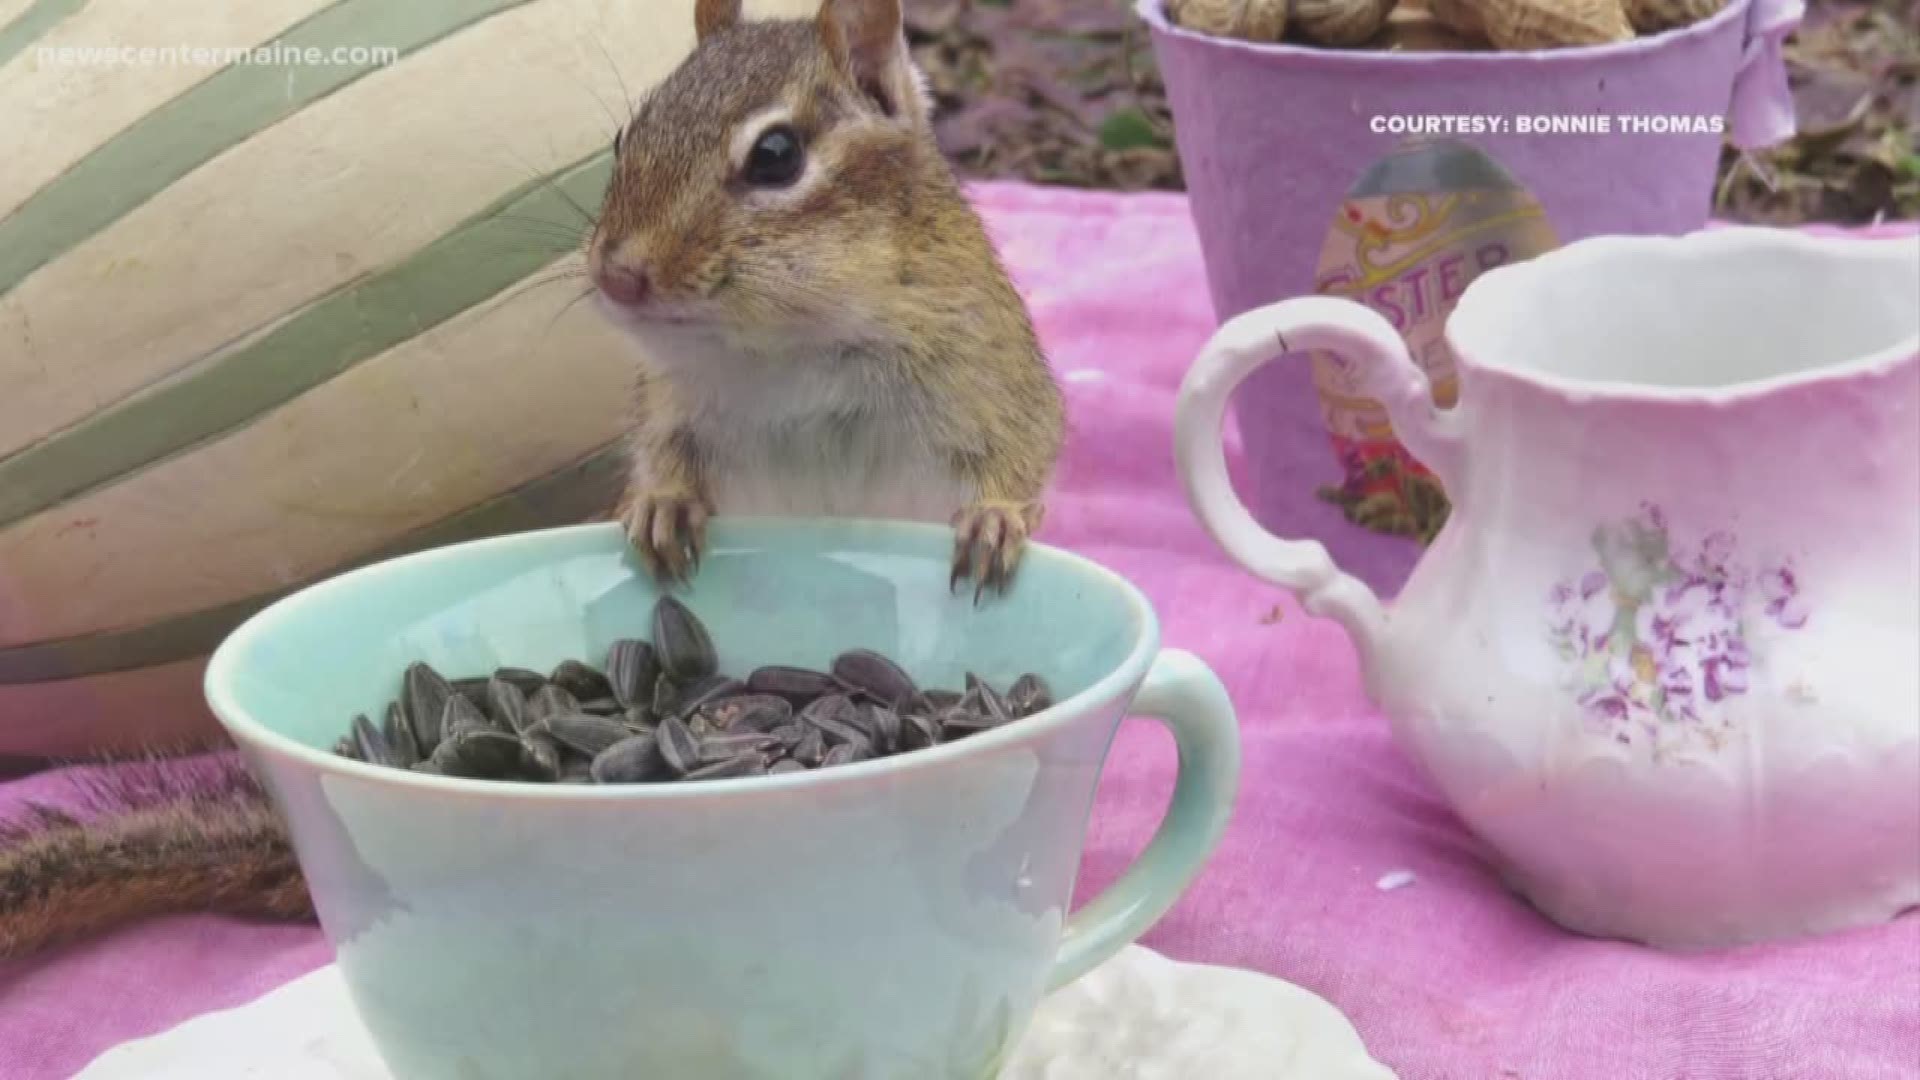 NOW: Tea parties for the backyard critters